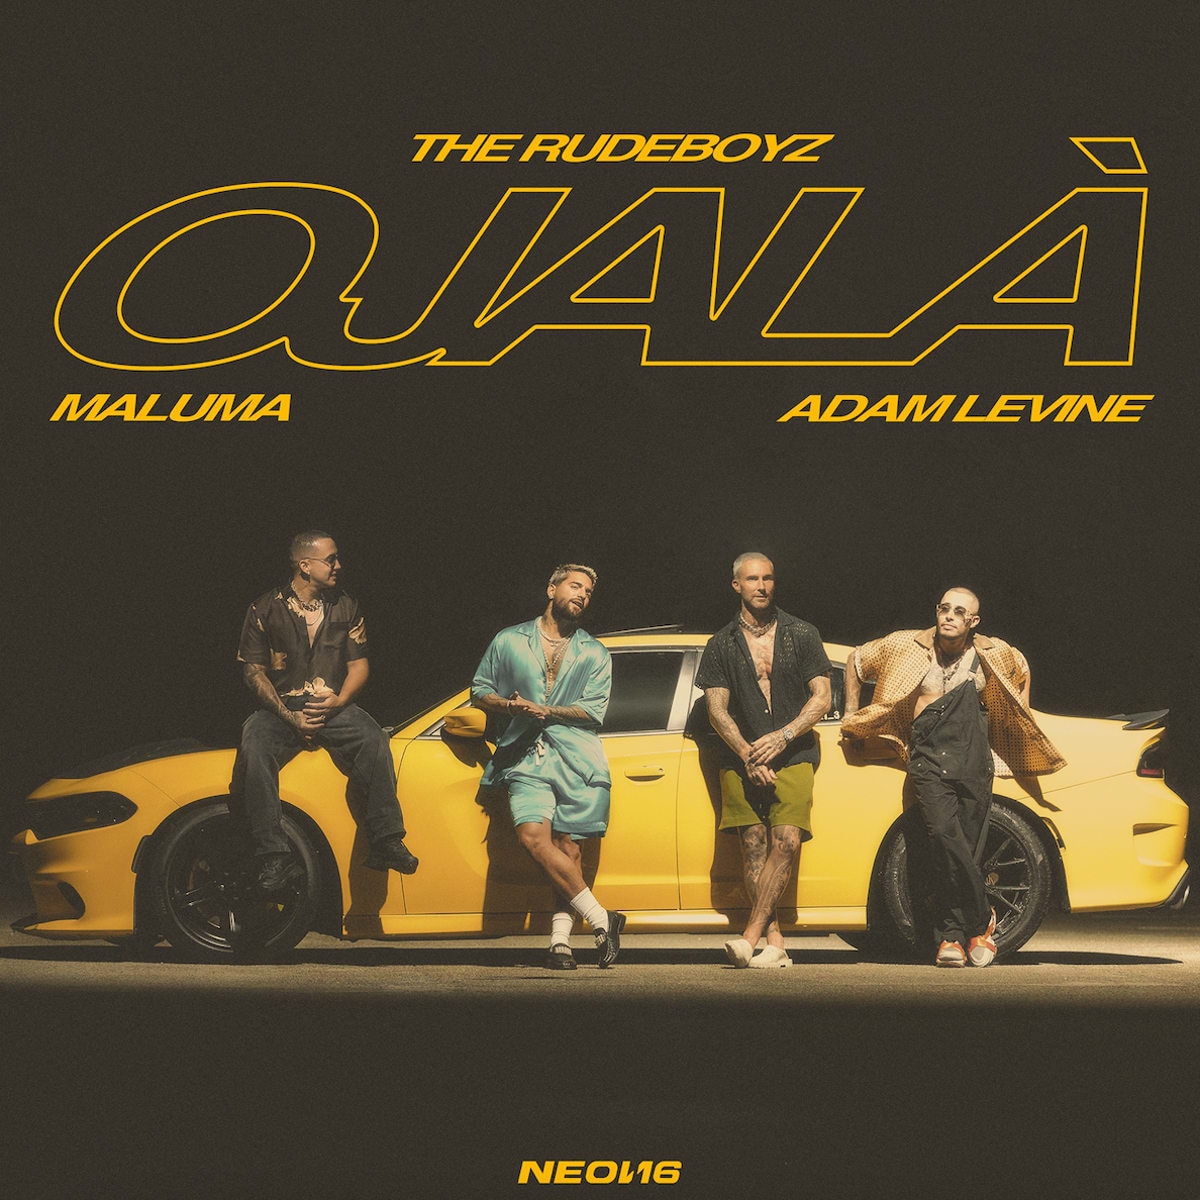 Maluma and Adam Levine will debut their Spanish language single “Ojalá” in collaboration with The Rudeboyz